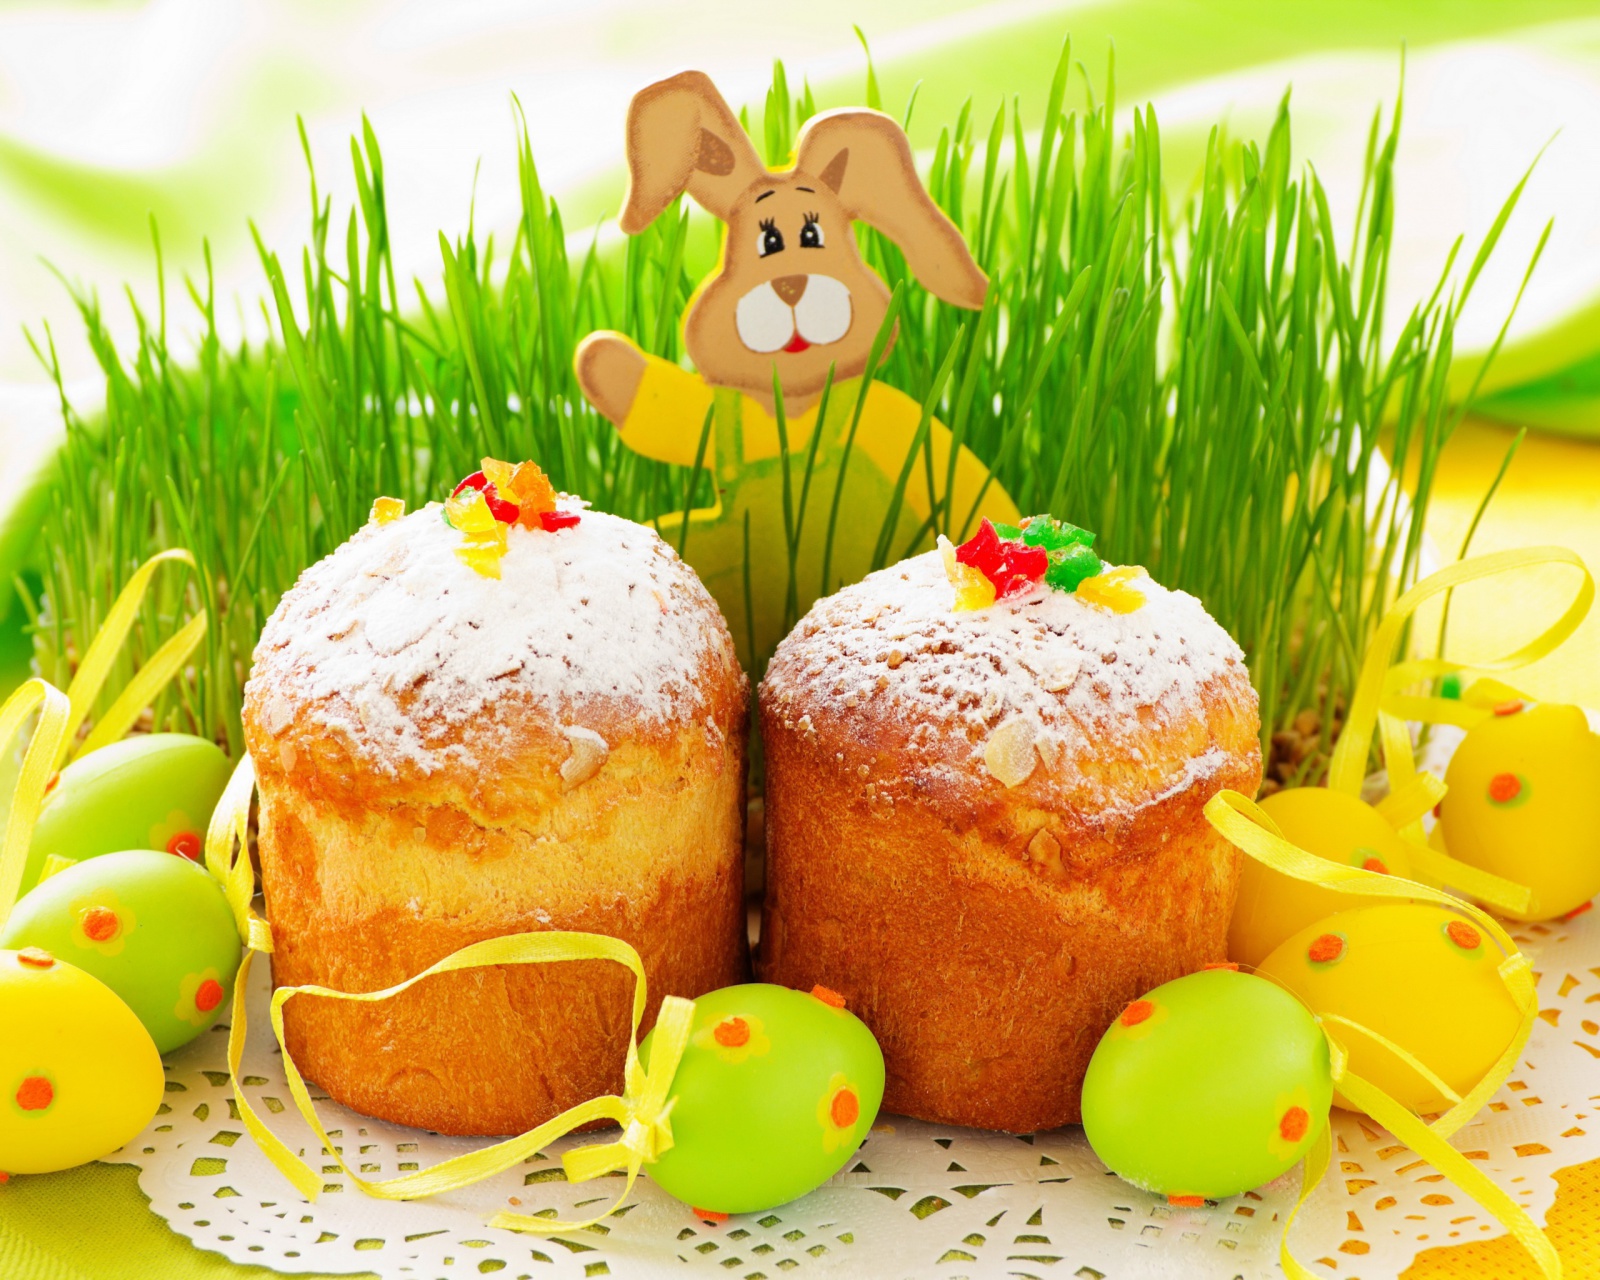 Easter Wish and Eggs wallpaper 1600x1280